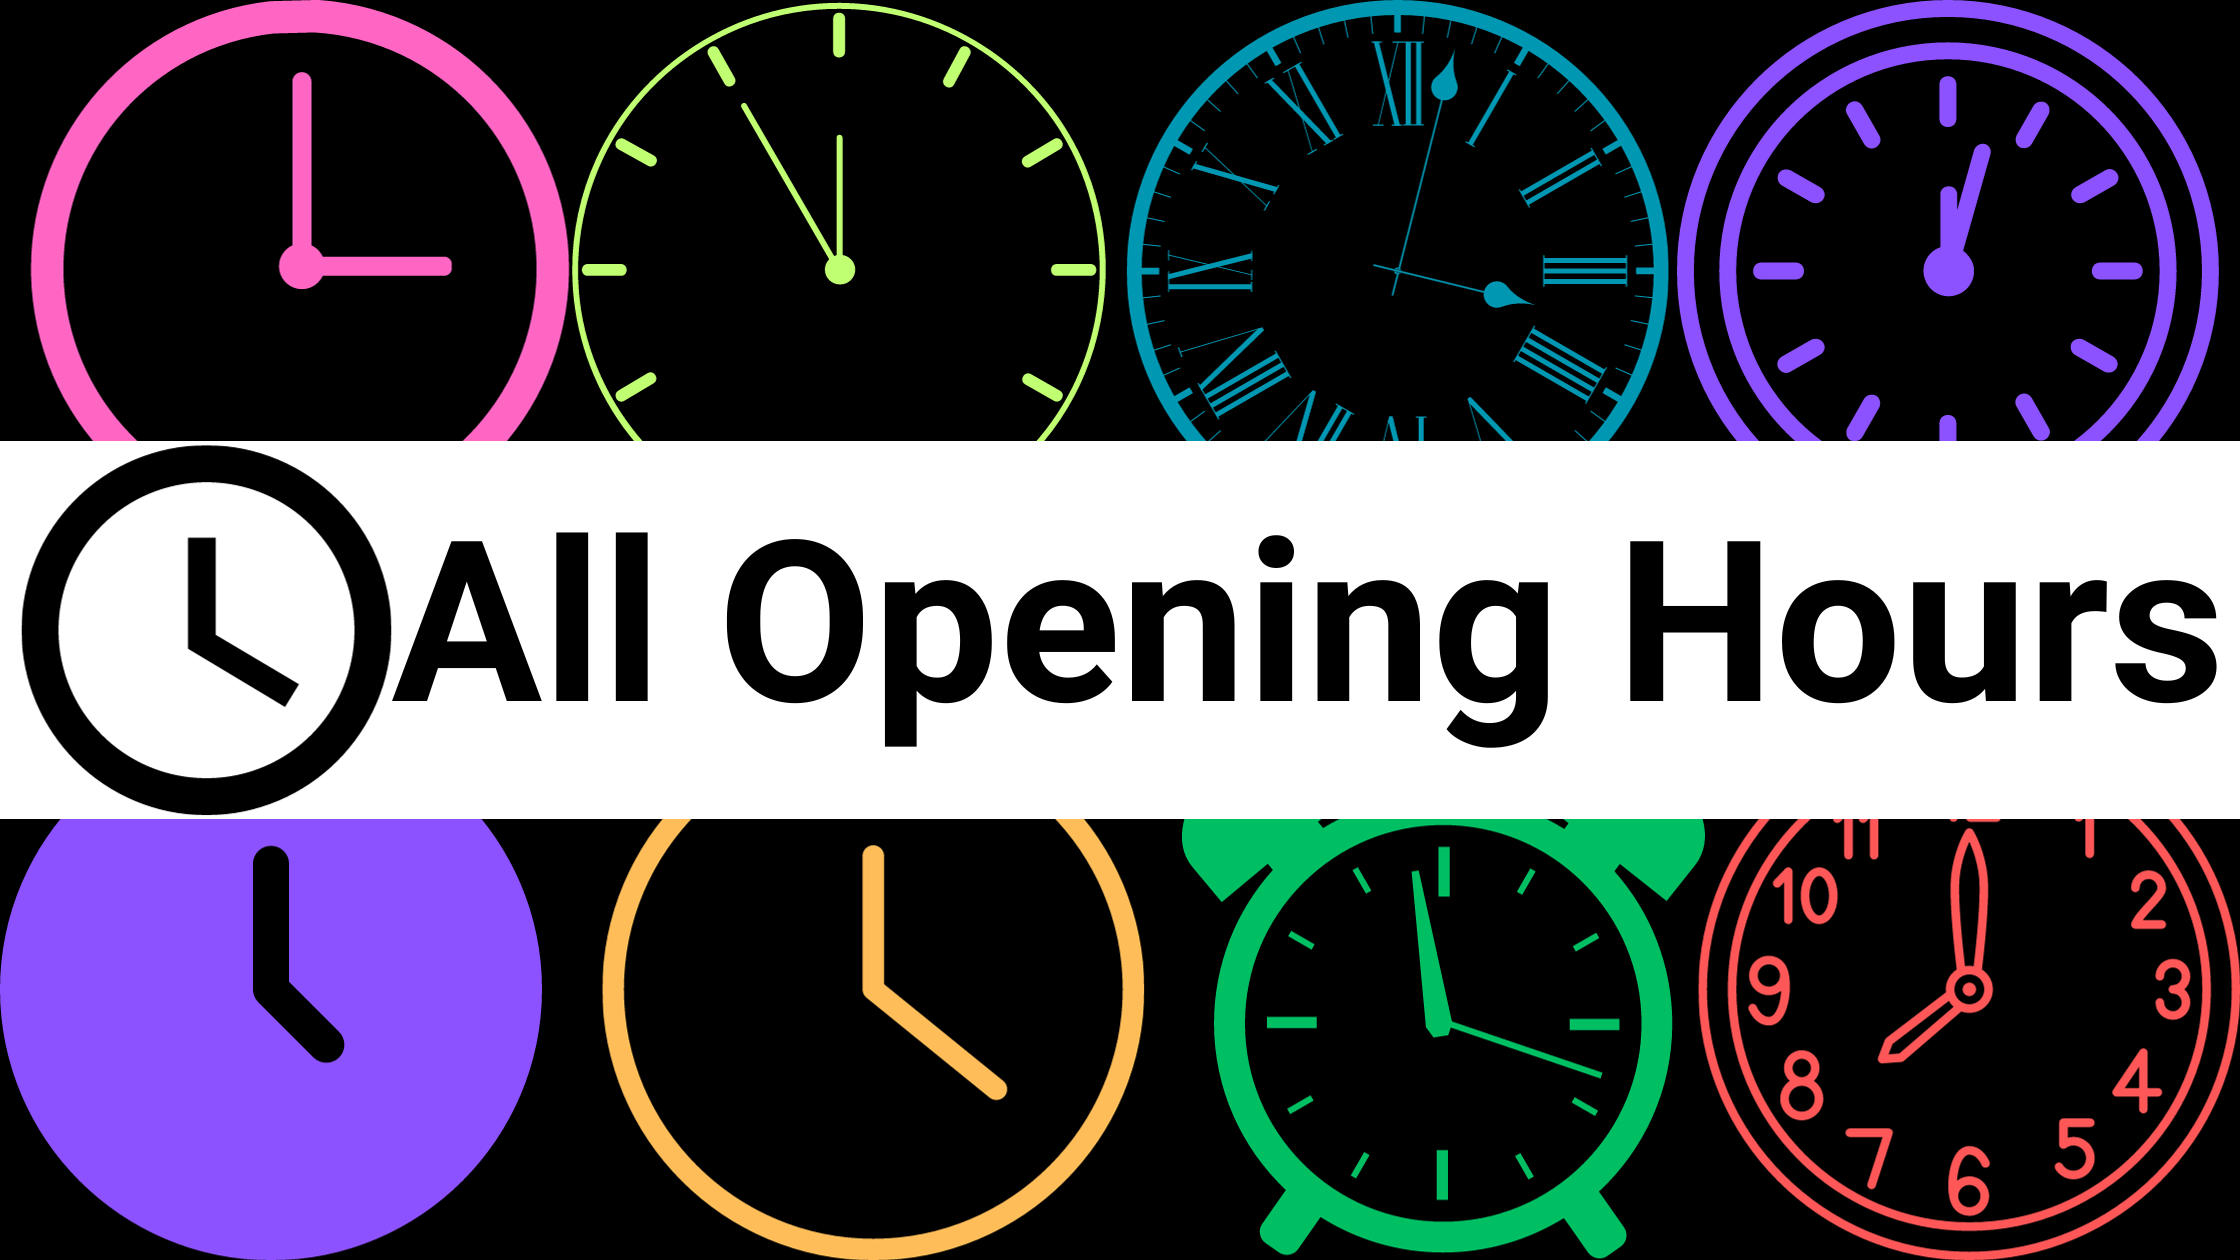 Low K (155 Mount Hall Rd) Opening Hours